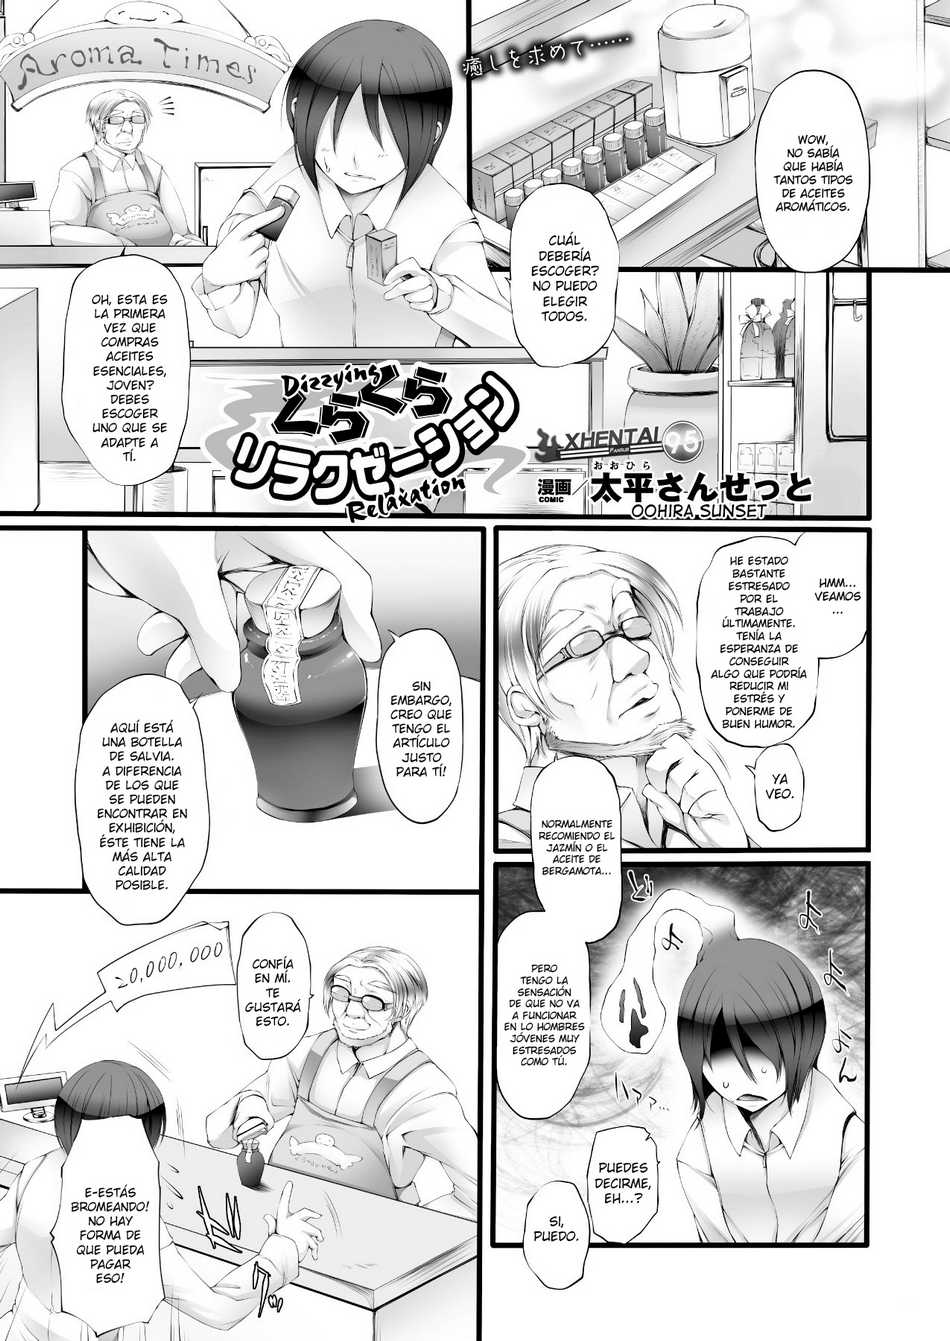 Dizzying relaxation - Page #1